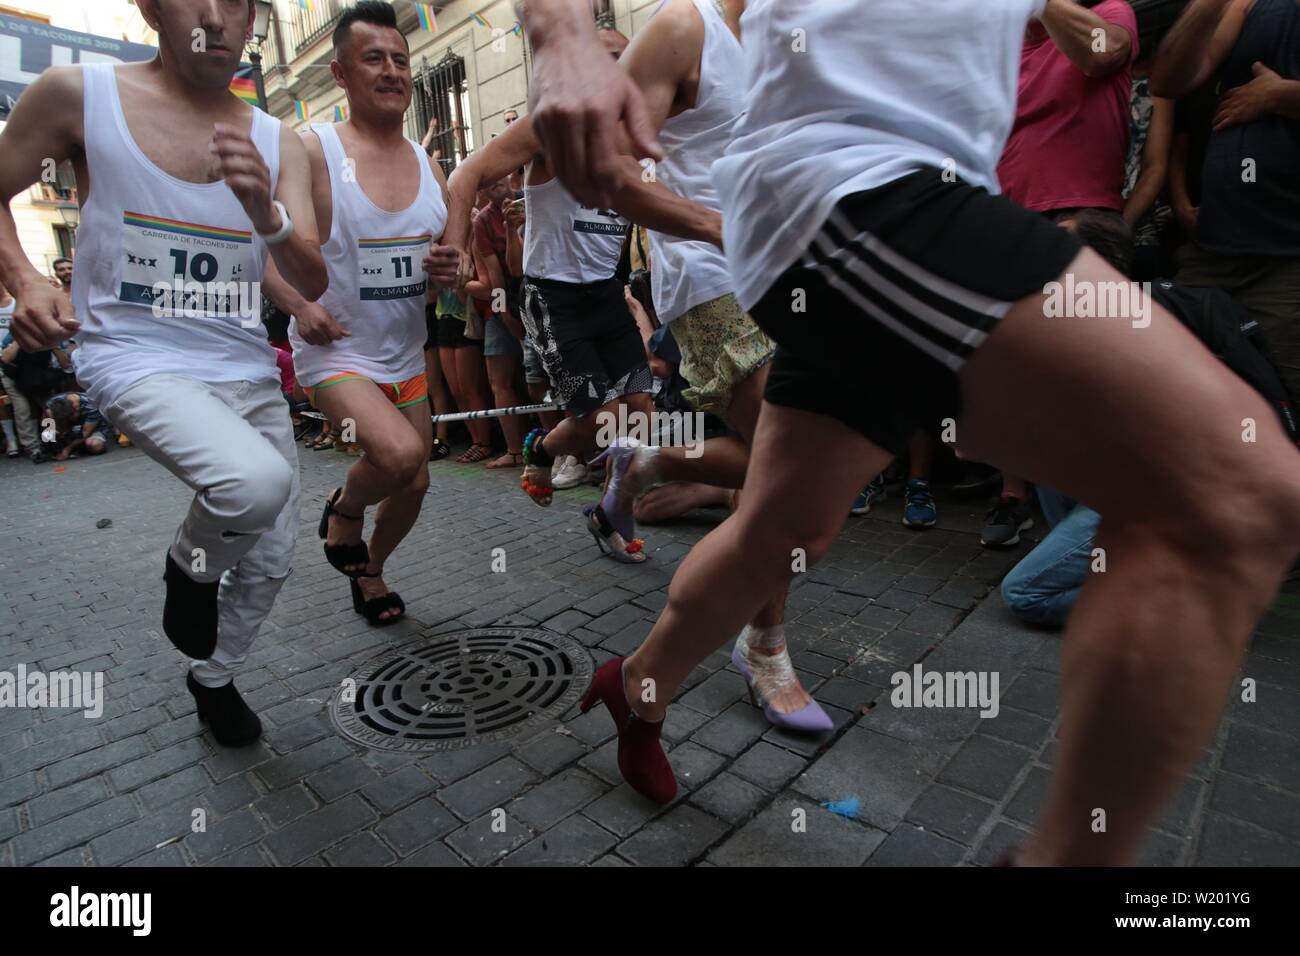 Madrid, Spain. 04th July, 2019. Madrid Spain; 04/07/2019.- High heels race at the Gay Pride celebrations in Madrid, activities prior to the parade on the 7th one of the great festivities of Madrid. Credit: Juan Carlos Rojas/Picture Alliance | usage worldwide/dpa/Alamy Live News Stock Photo